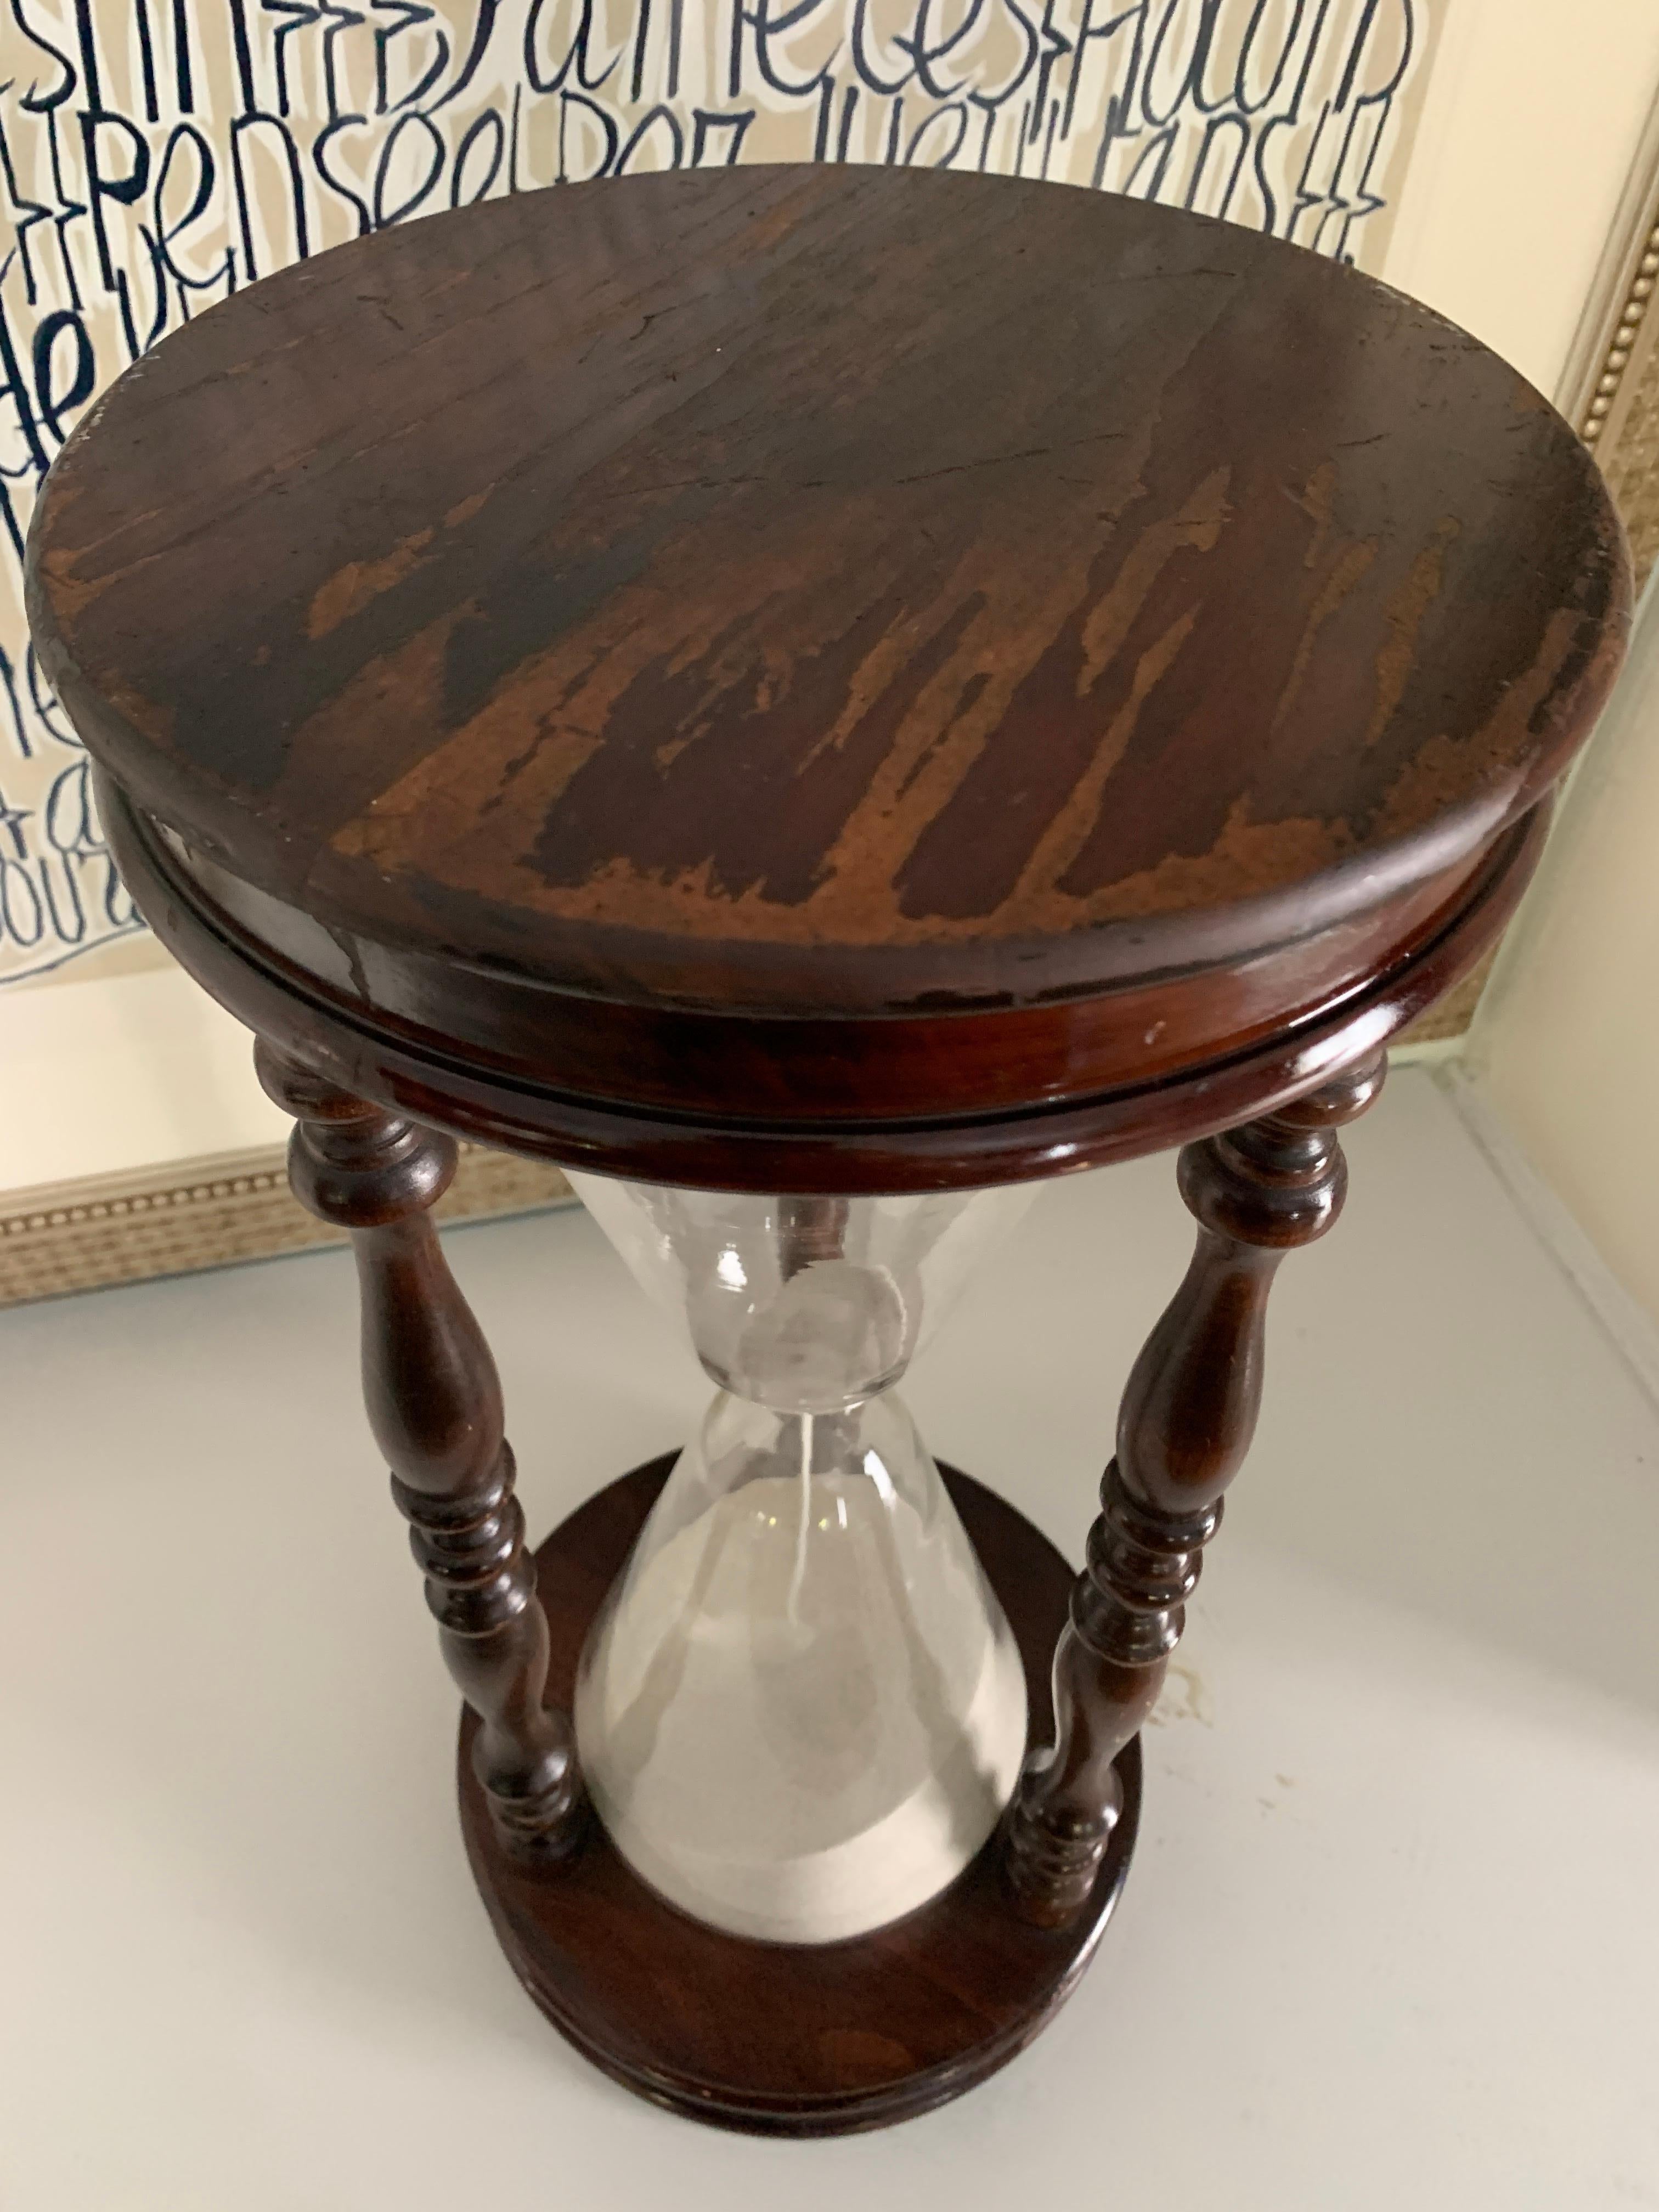 Over 20 inches tall, a wonderful wood framed hour glass or sand timer. A compliment to the library, console table, shelves or as a bookend - a great piece that will stand out in time. The top and bottom surfaces have areas of distressed wood, we